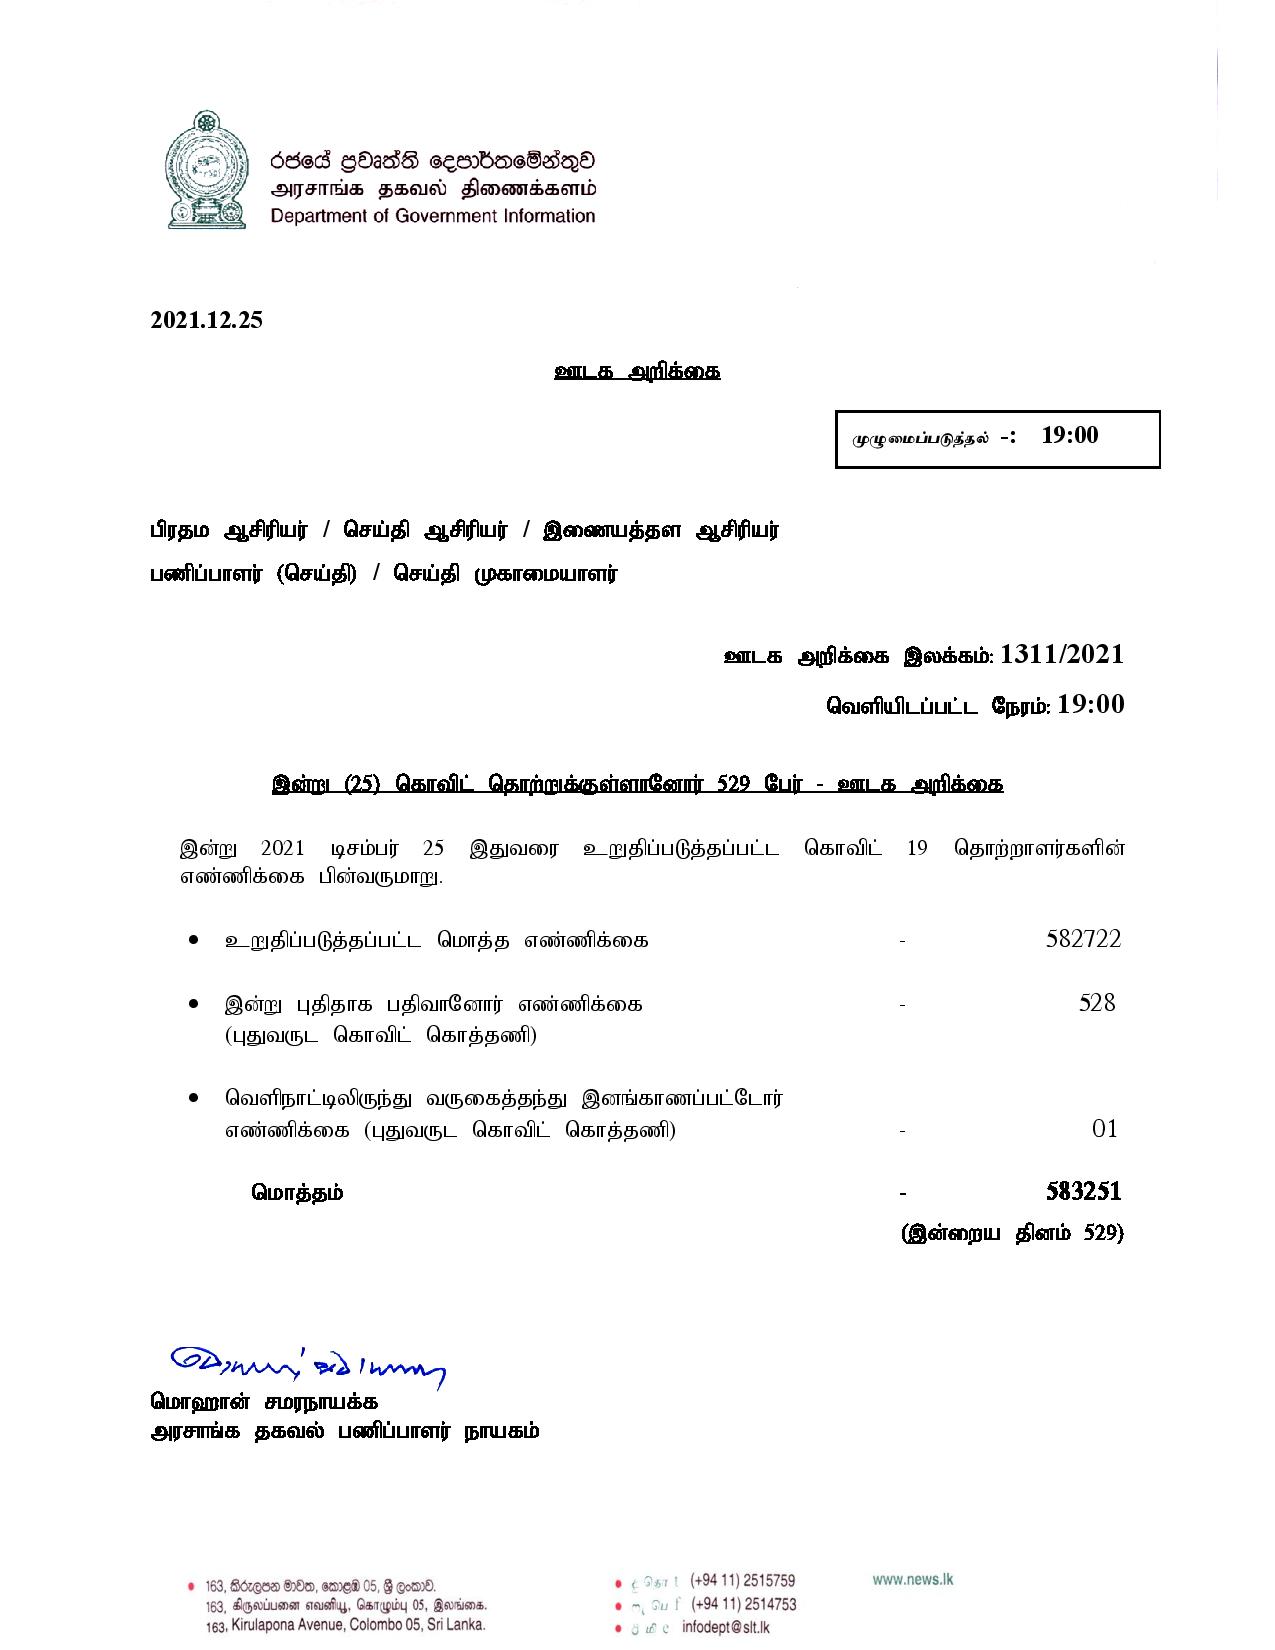 Press Release 1311 Tamil page 001